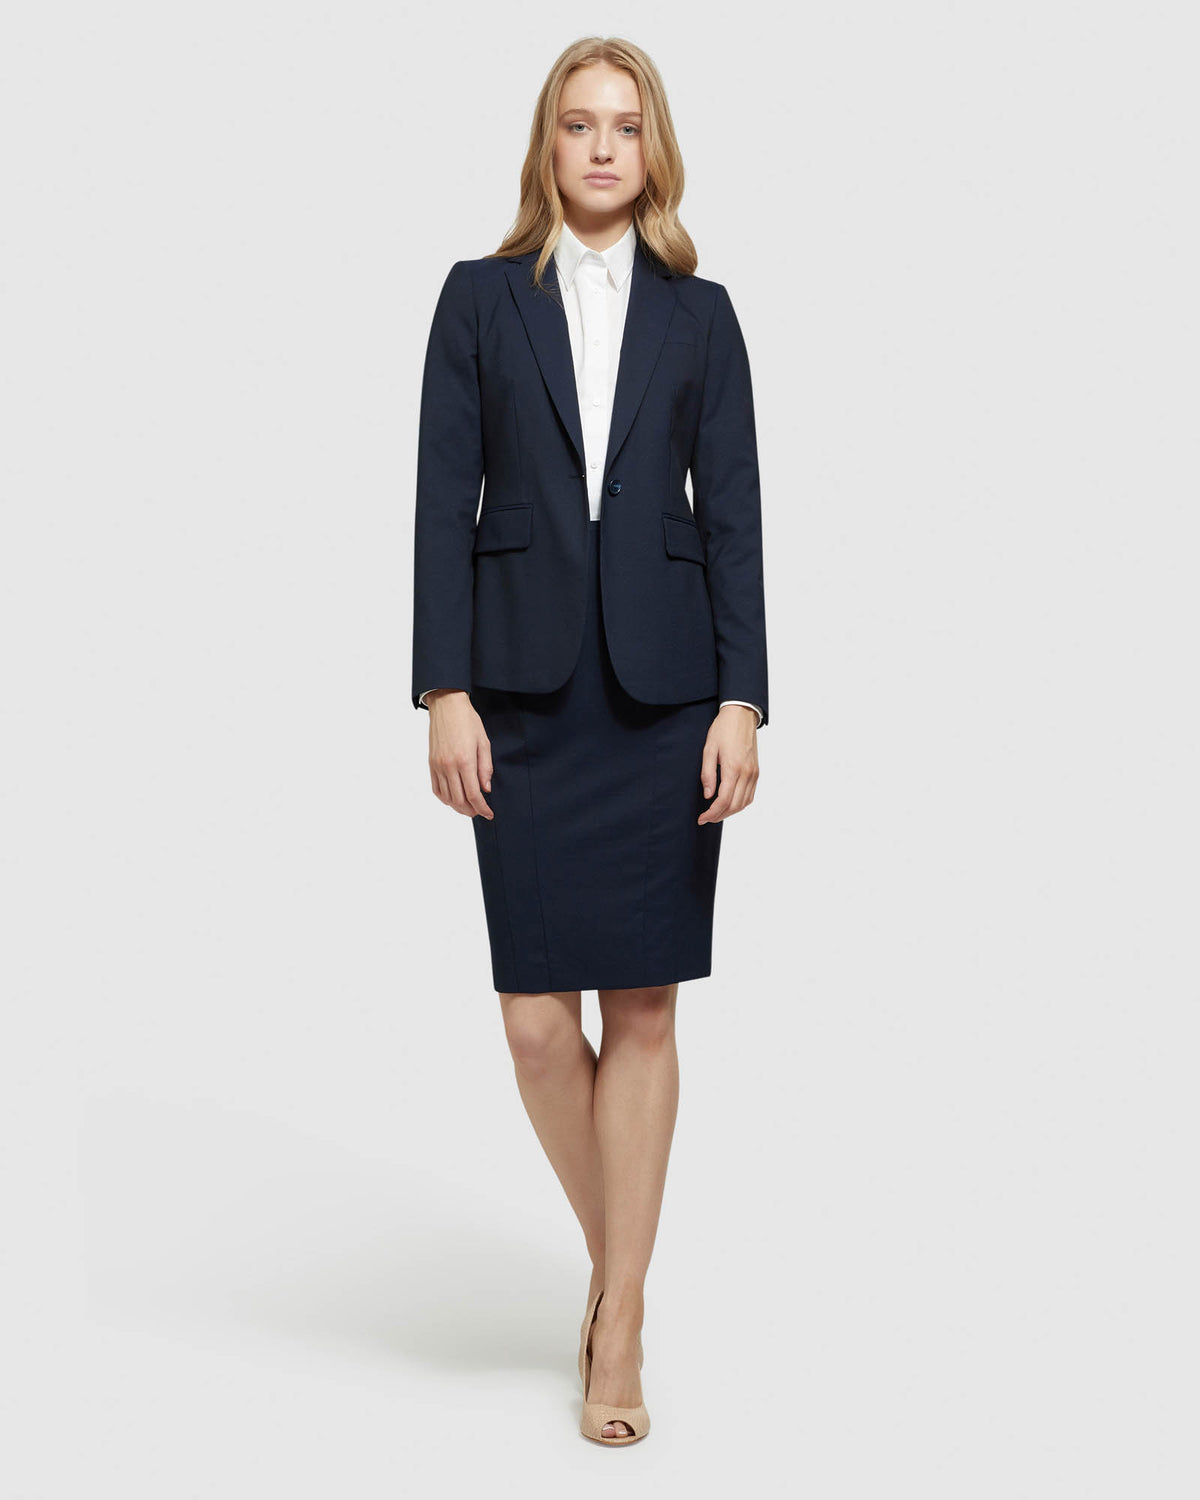 Royal Blue wool blend one-button Skirt Suit with peak lapels | Sumissura